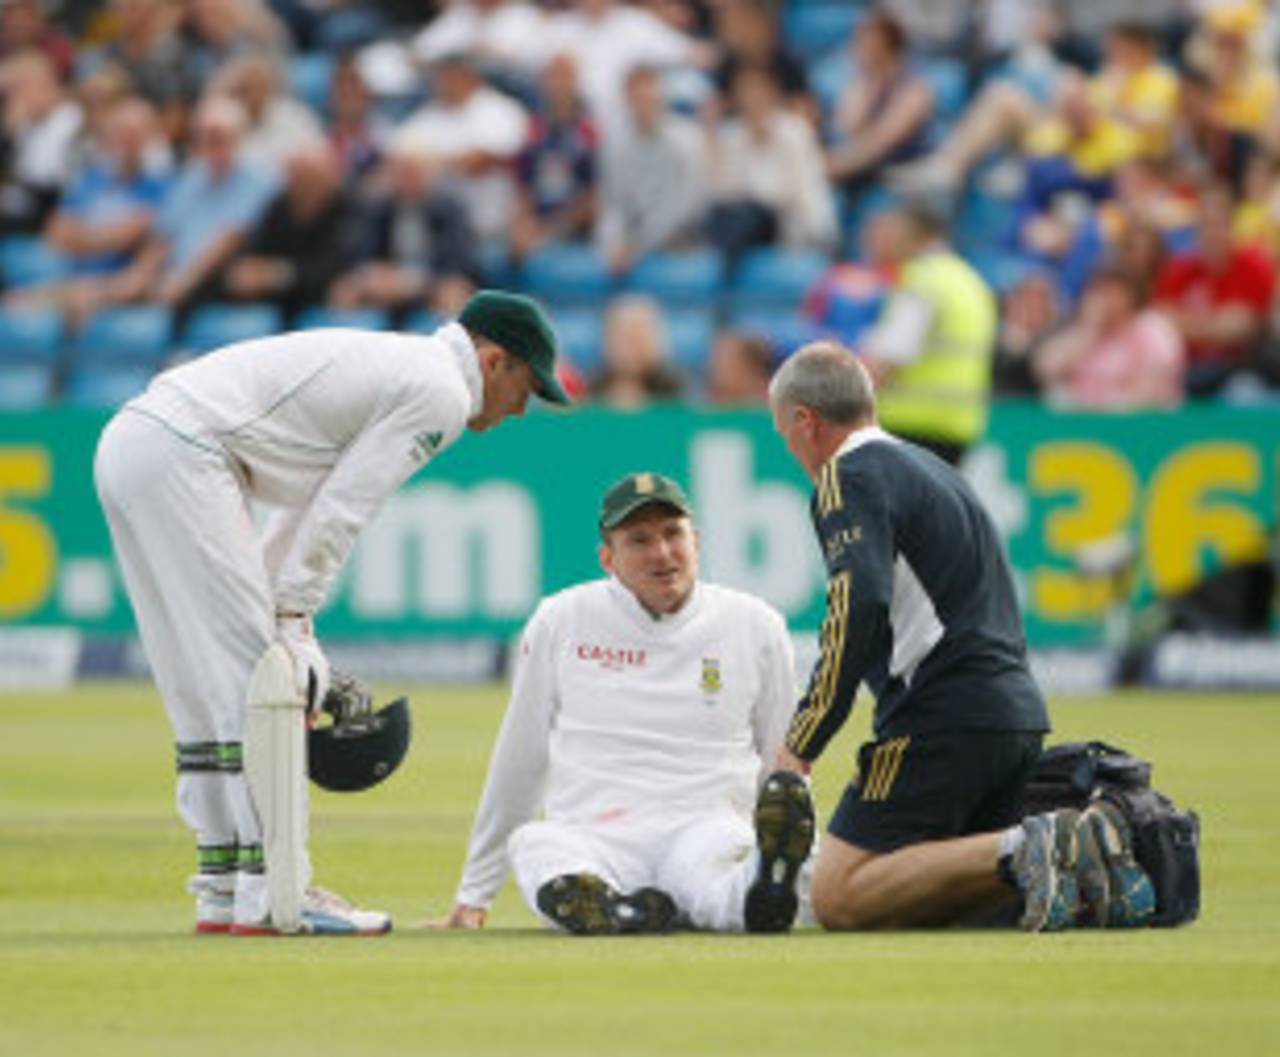 Graeme Smith went down late on the third evening after chasing a ball to the boundary&nbsp;&nbsp;&bull;&nbsp;&nbsp;Getty Images